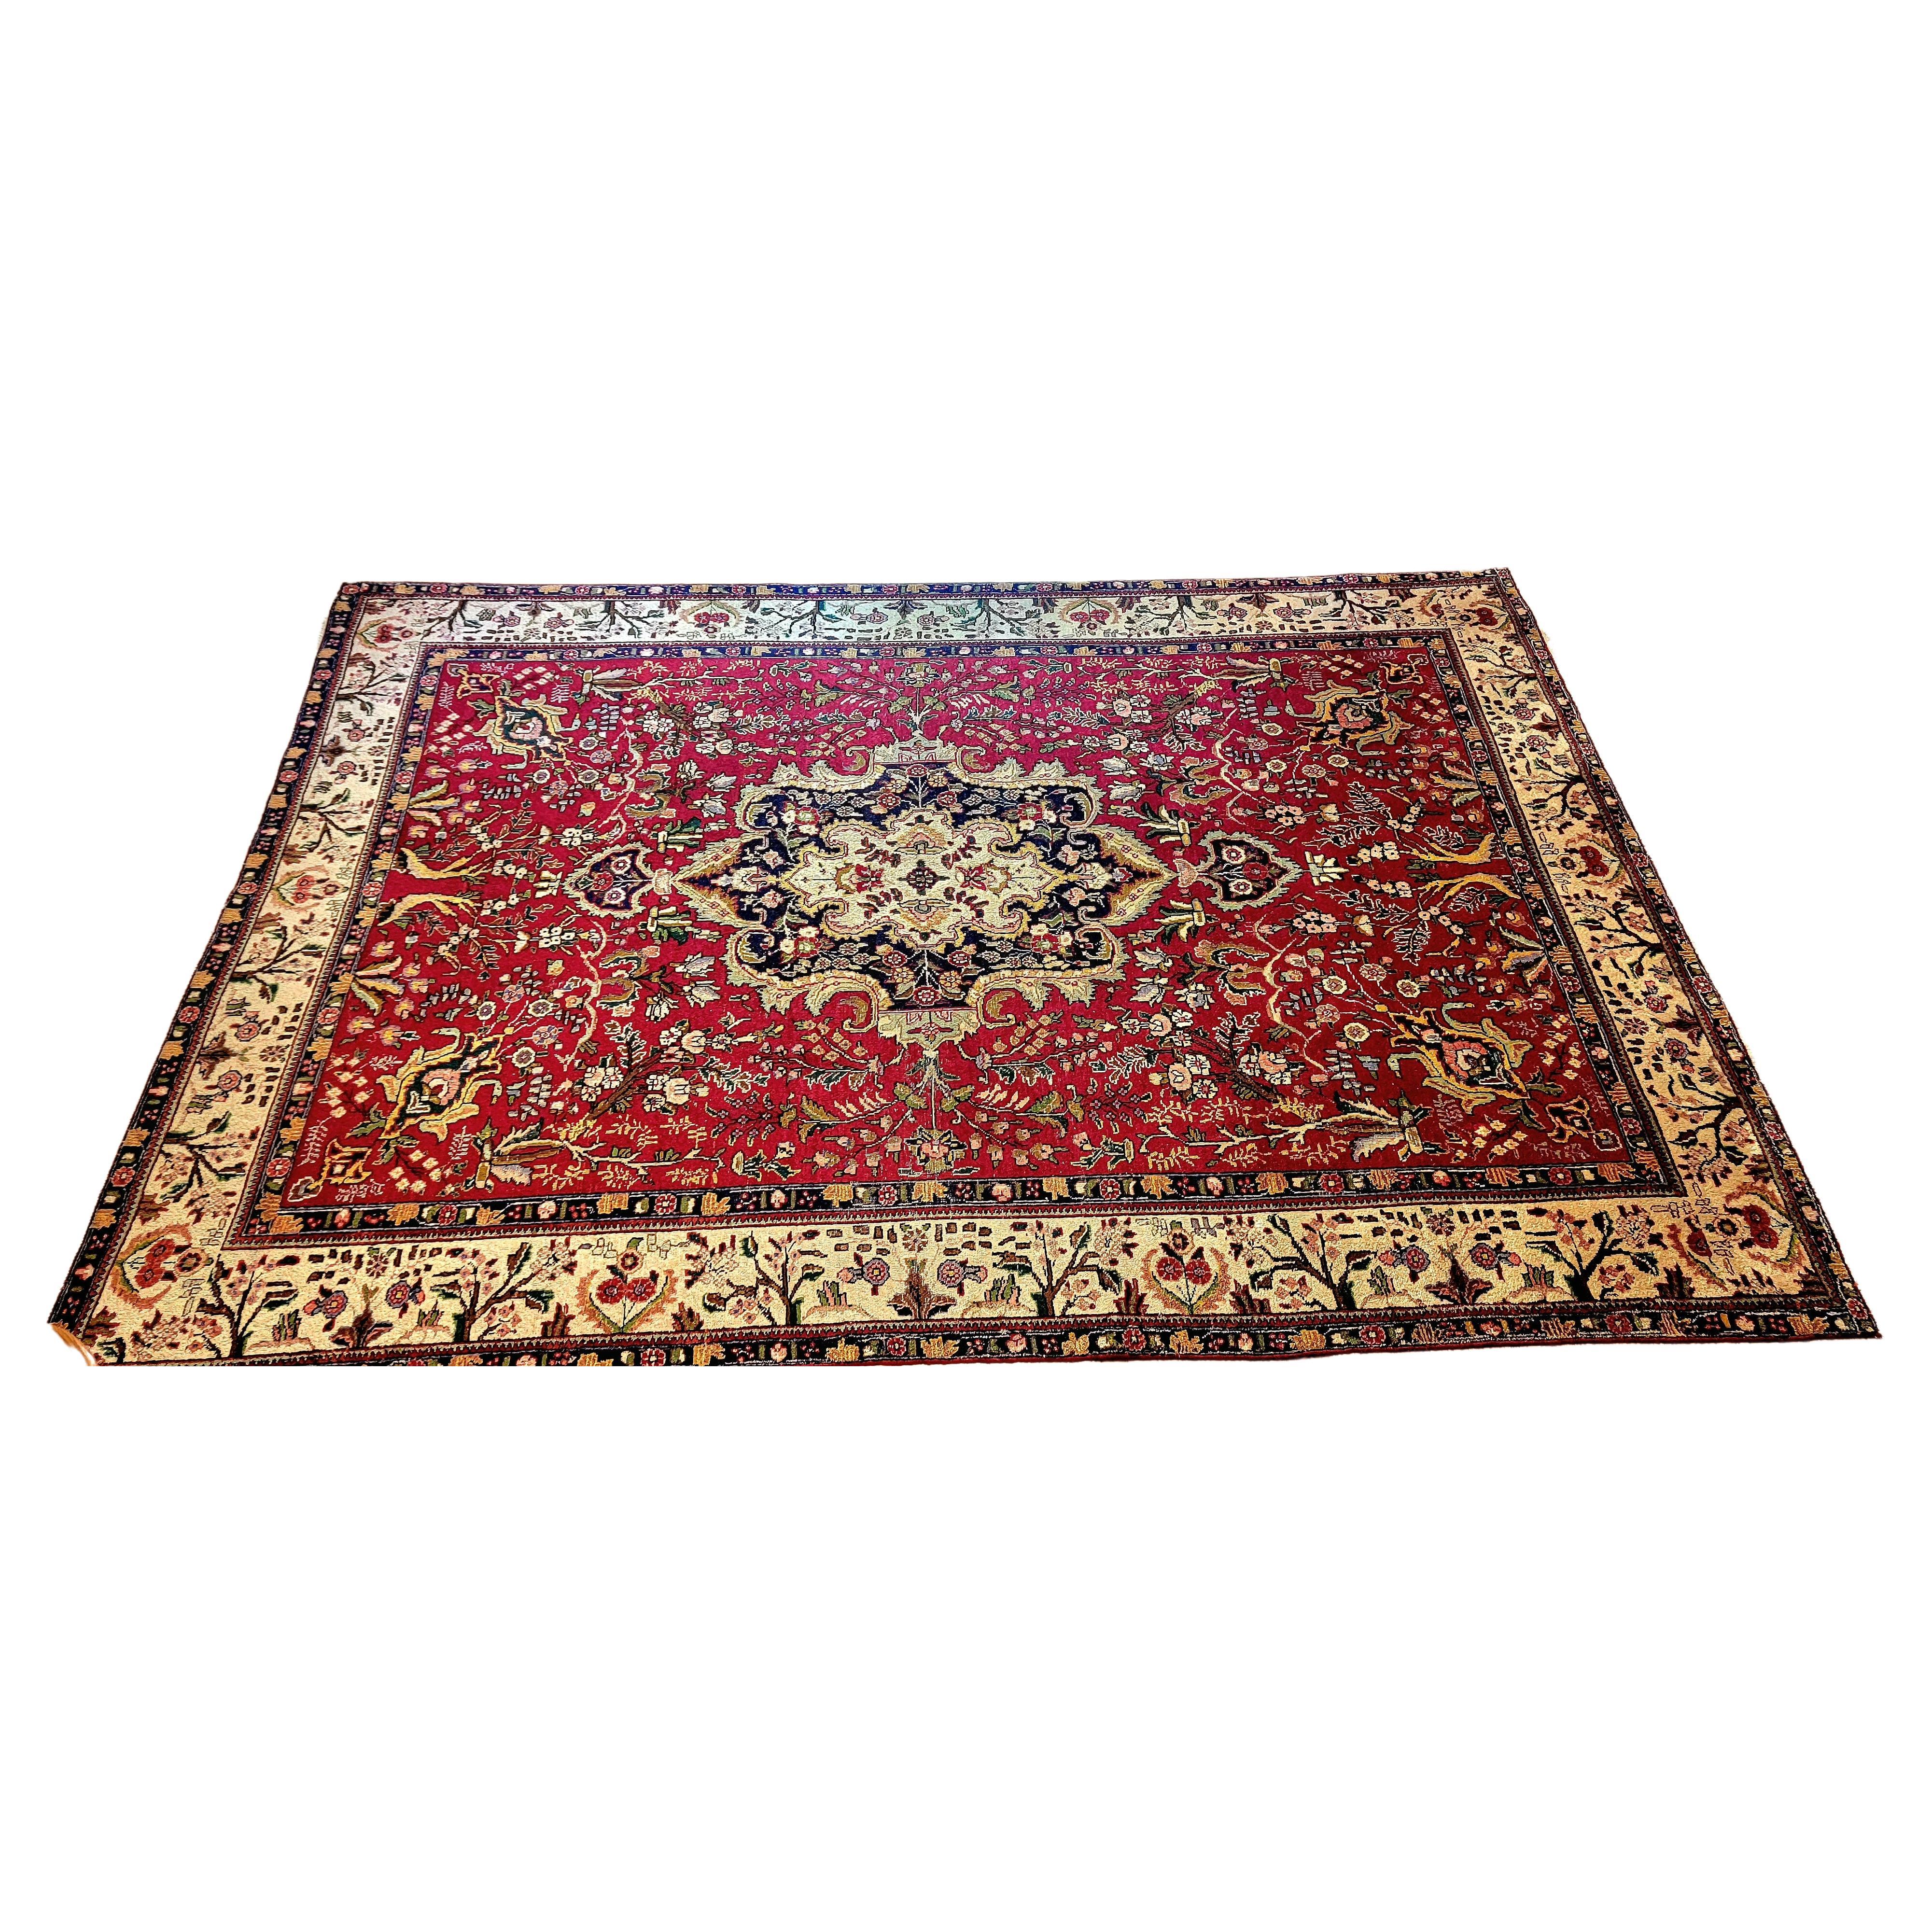 Large Rich Persian Area Rug For Sale